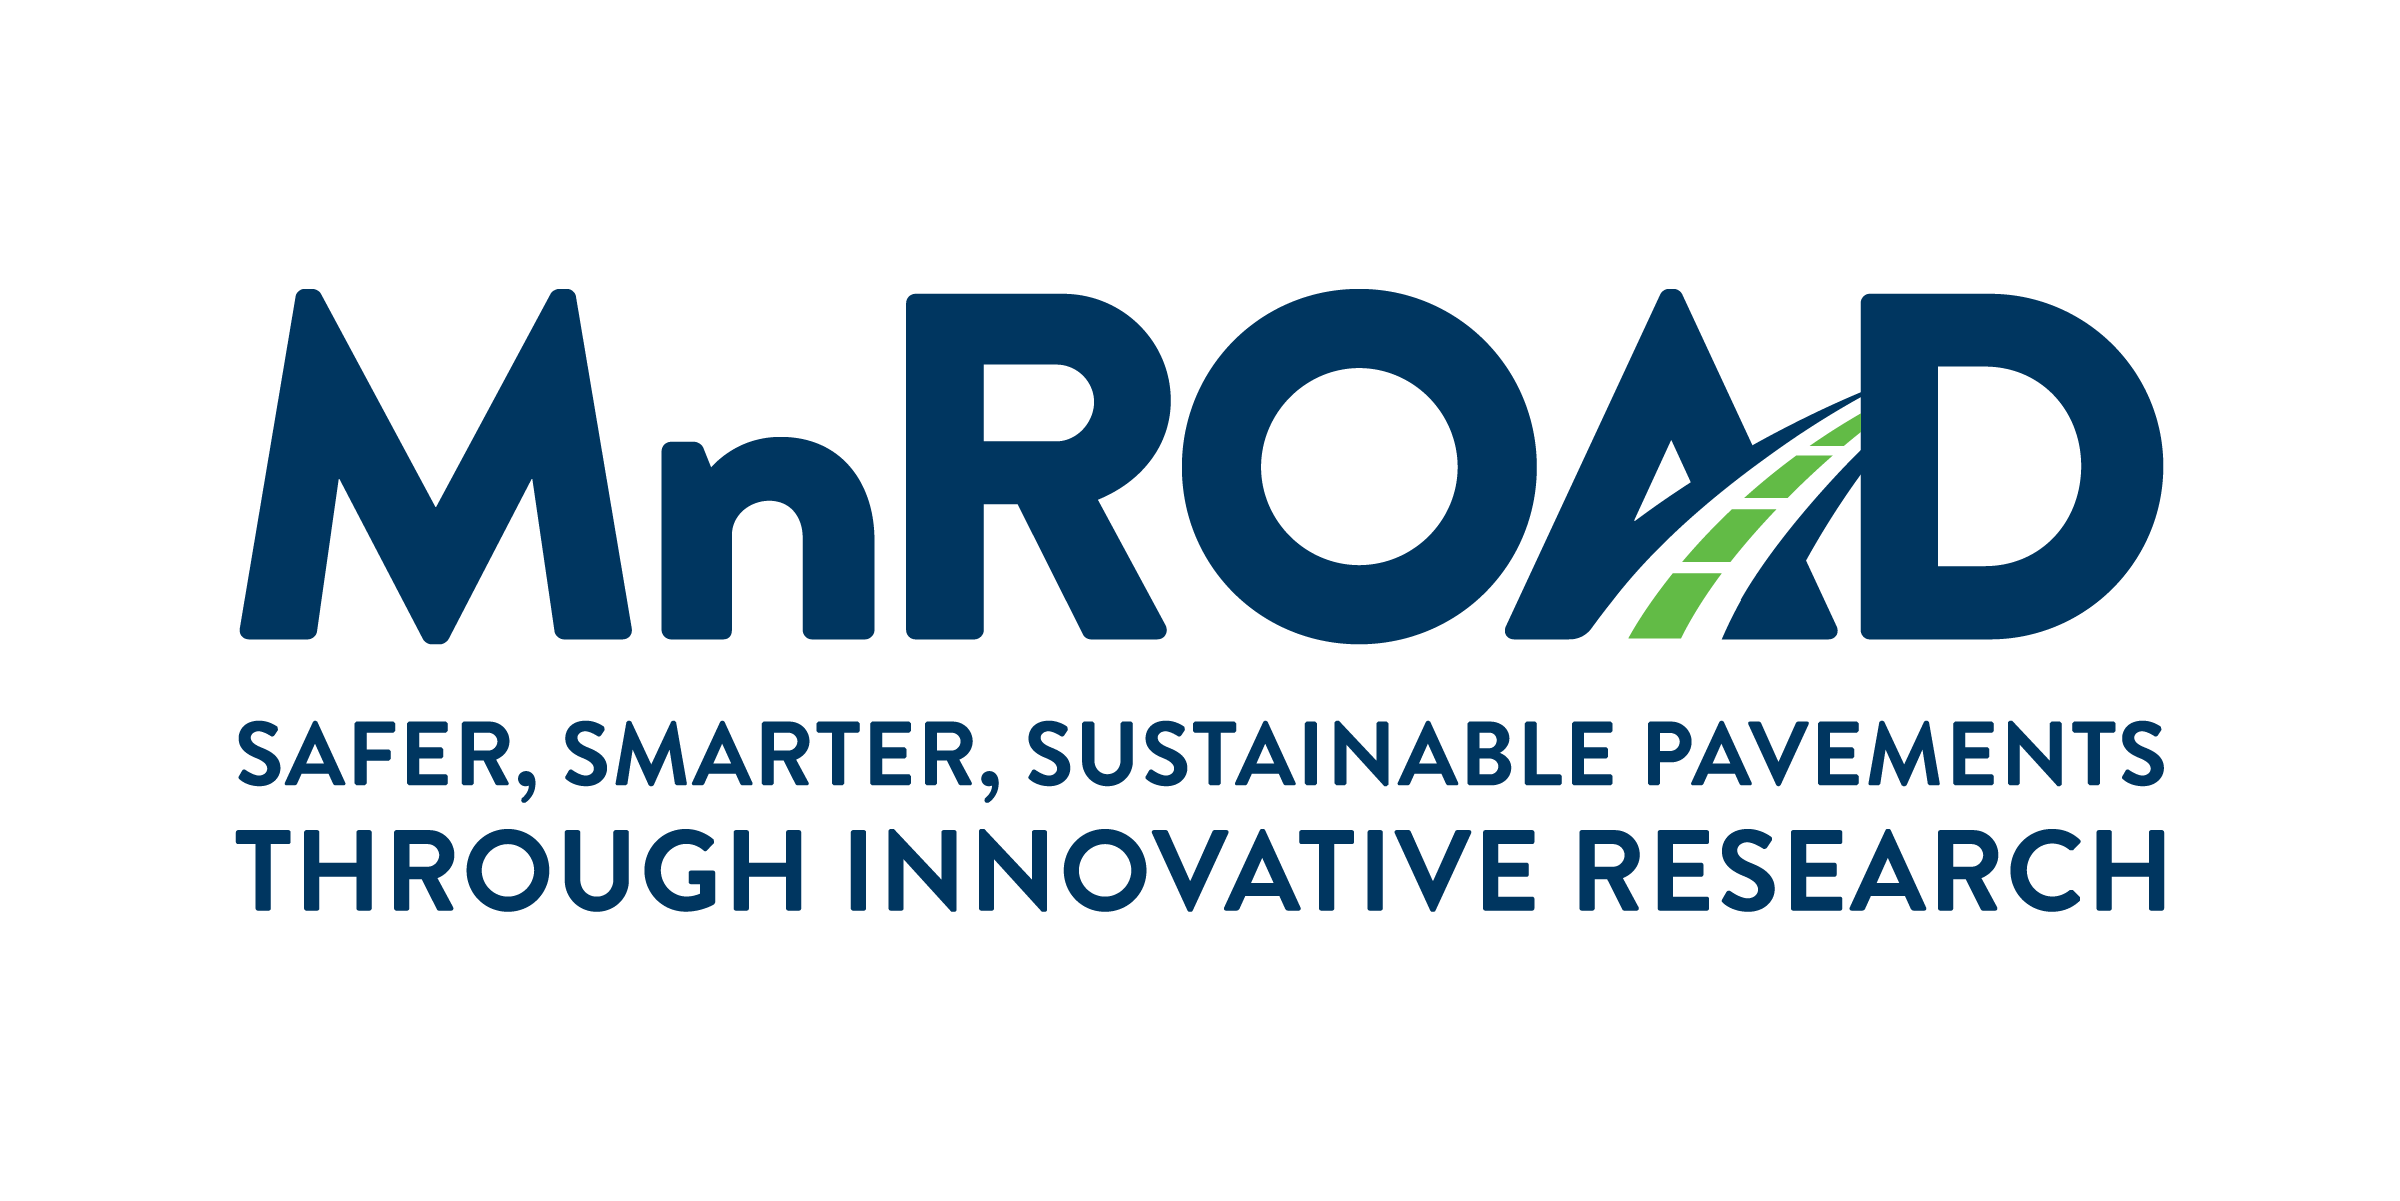 MnROAD Logo with tagline "Safer, smarter, sustainable pavements through innovative research"